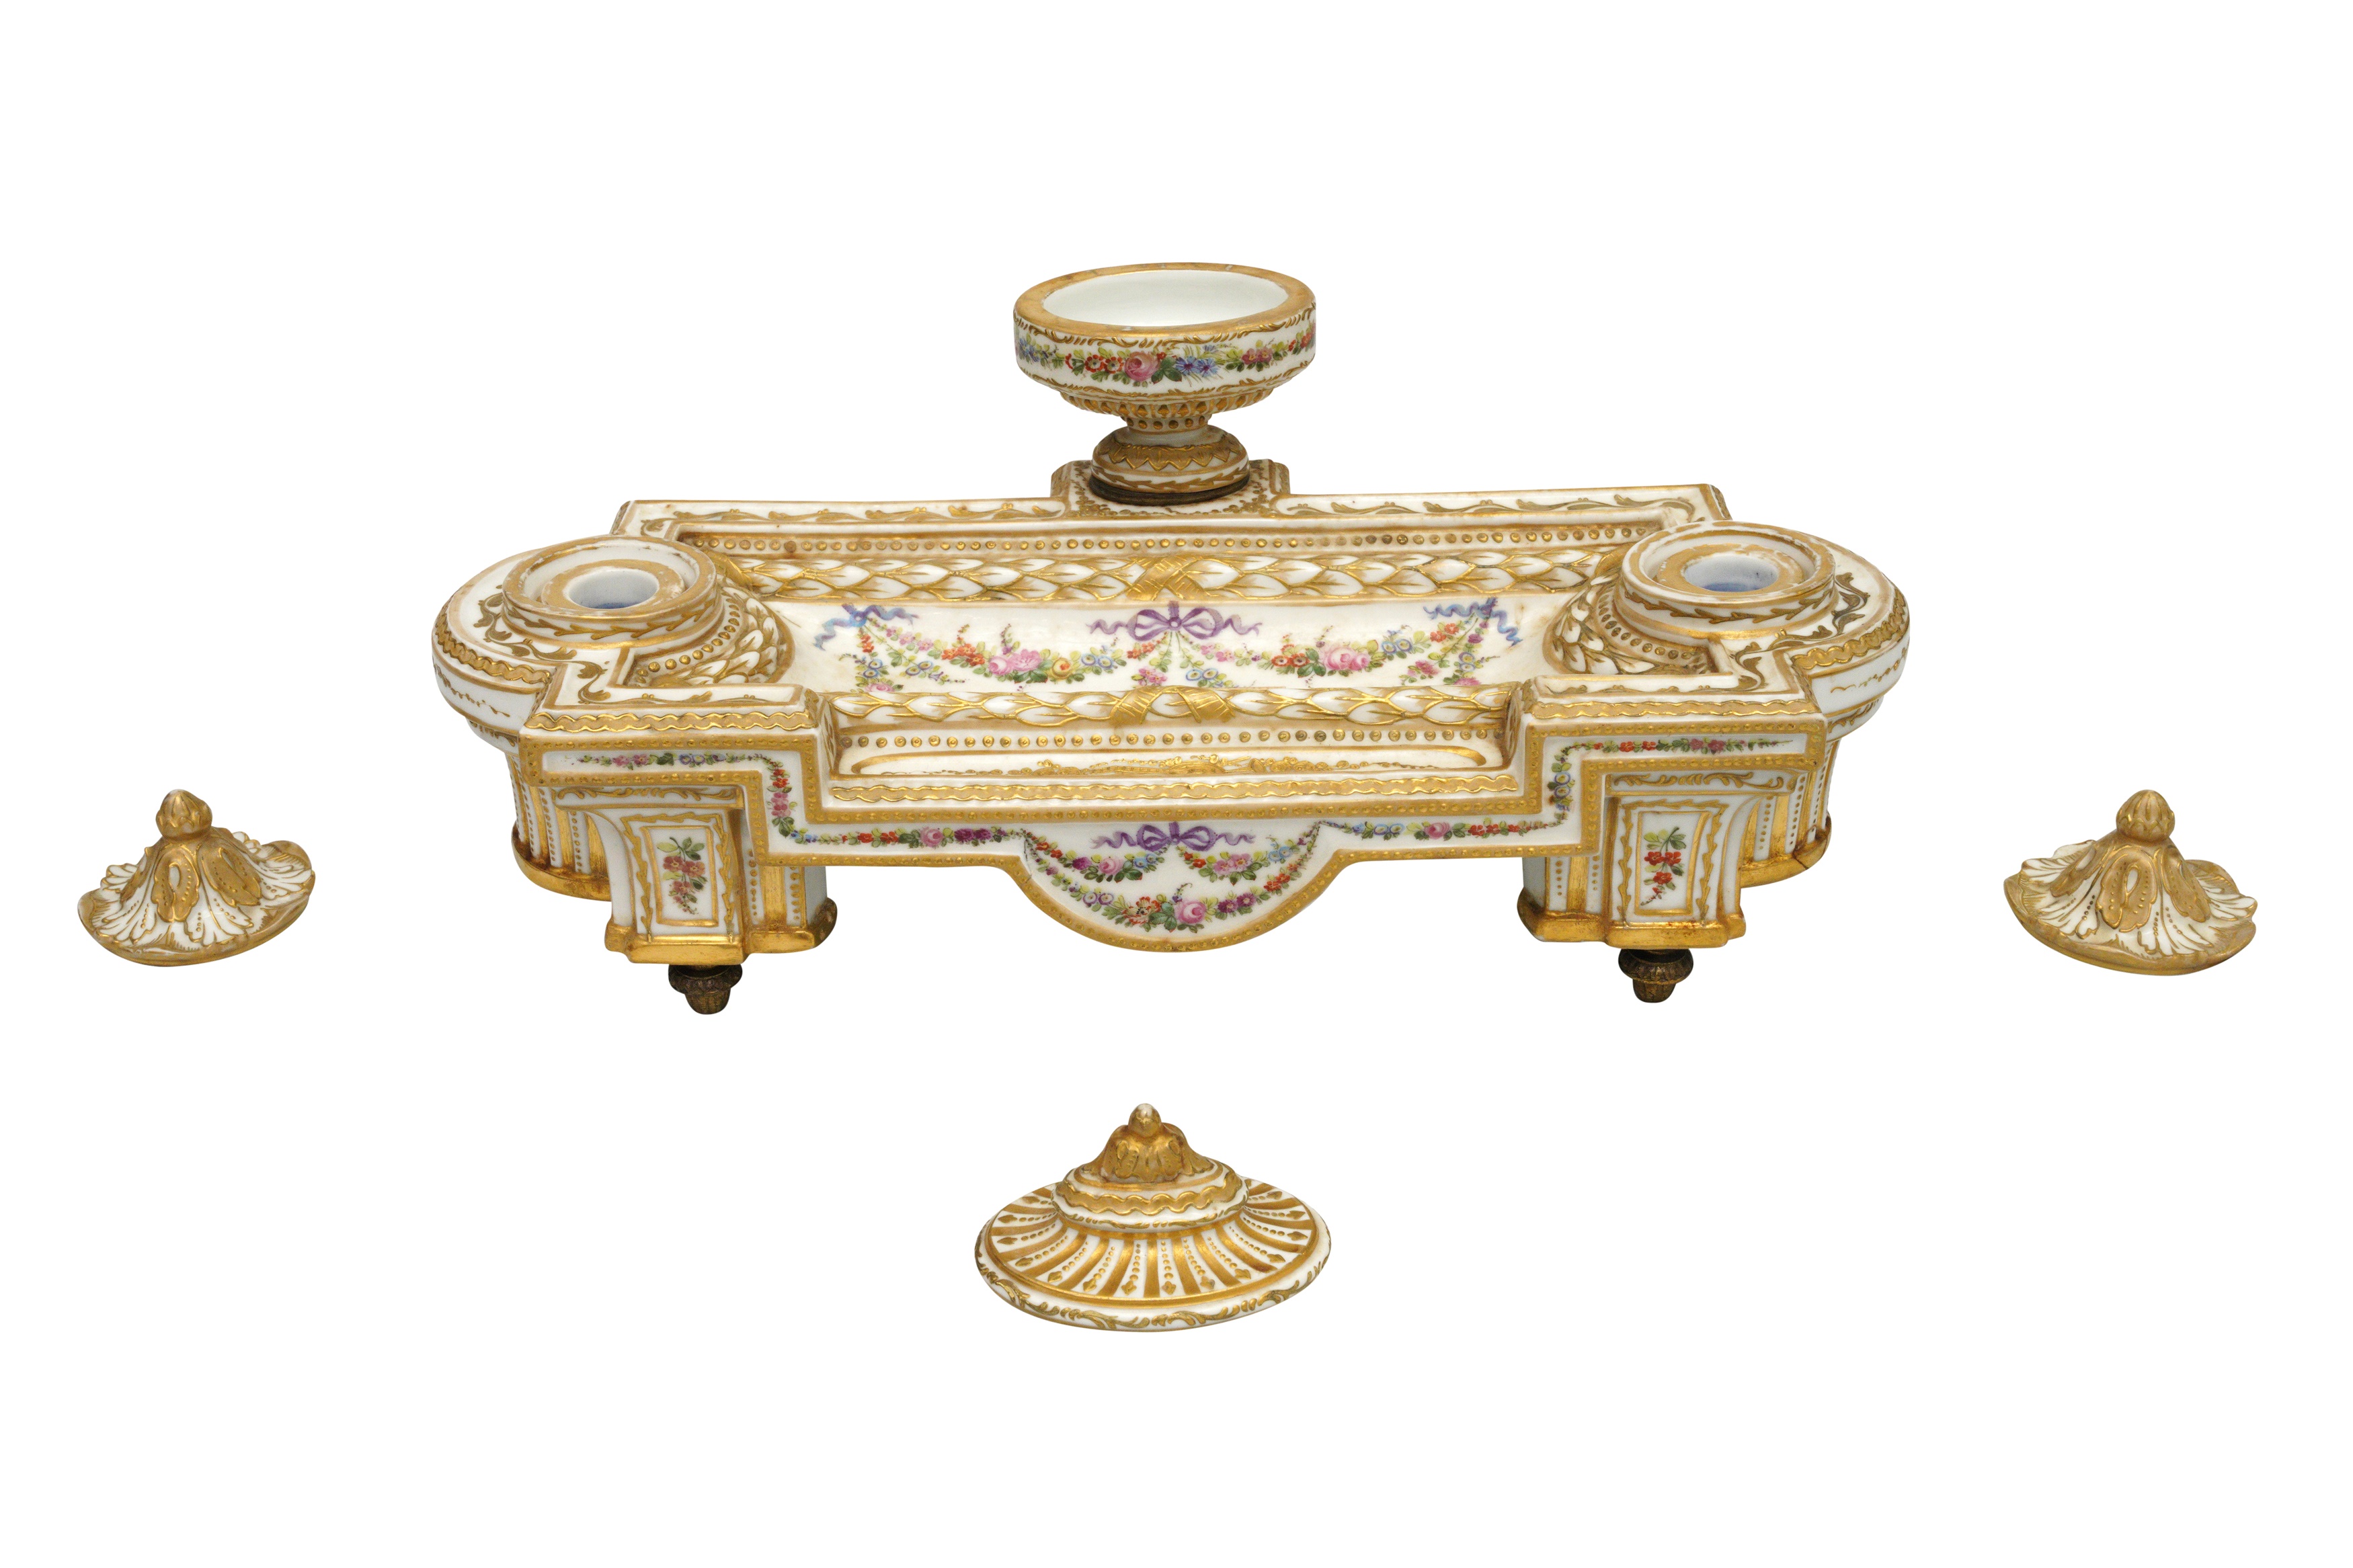 A FRENCH PARIS PORCELAIN PEN TRAY OF NEOCLASSICAL DESIGN, LATE 19TH CENTURY - Image 3 of 22